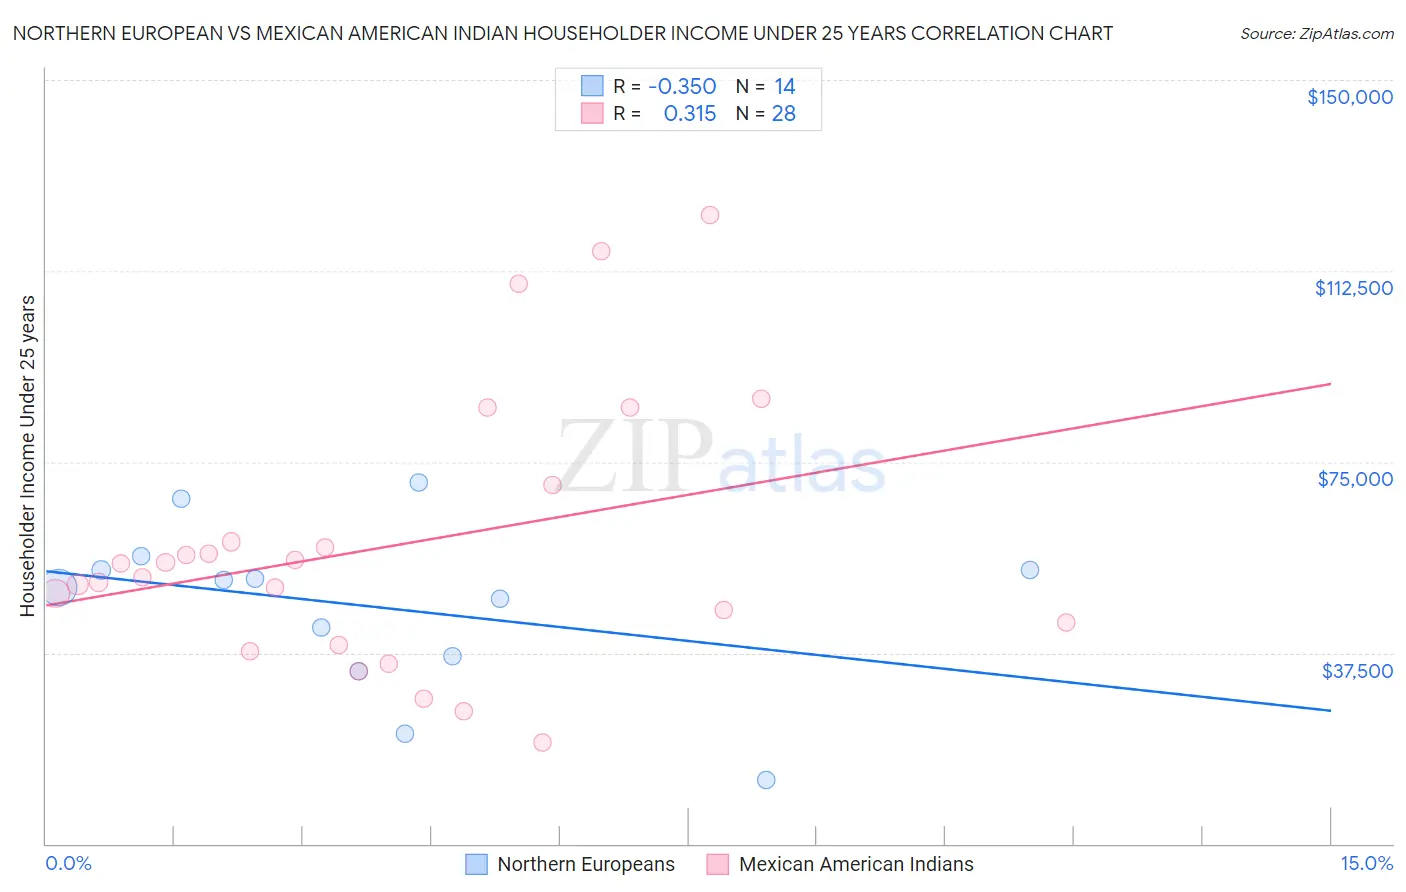 Northern European vs Mexican American Indian Householder Income Under 25 years